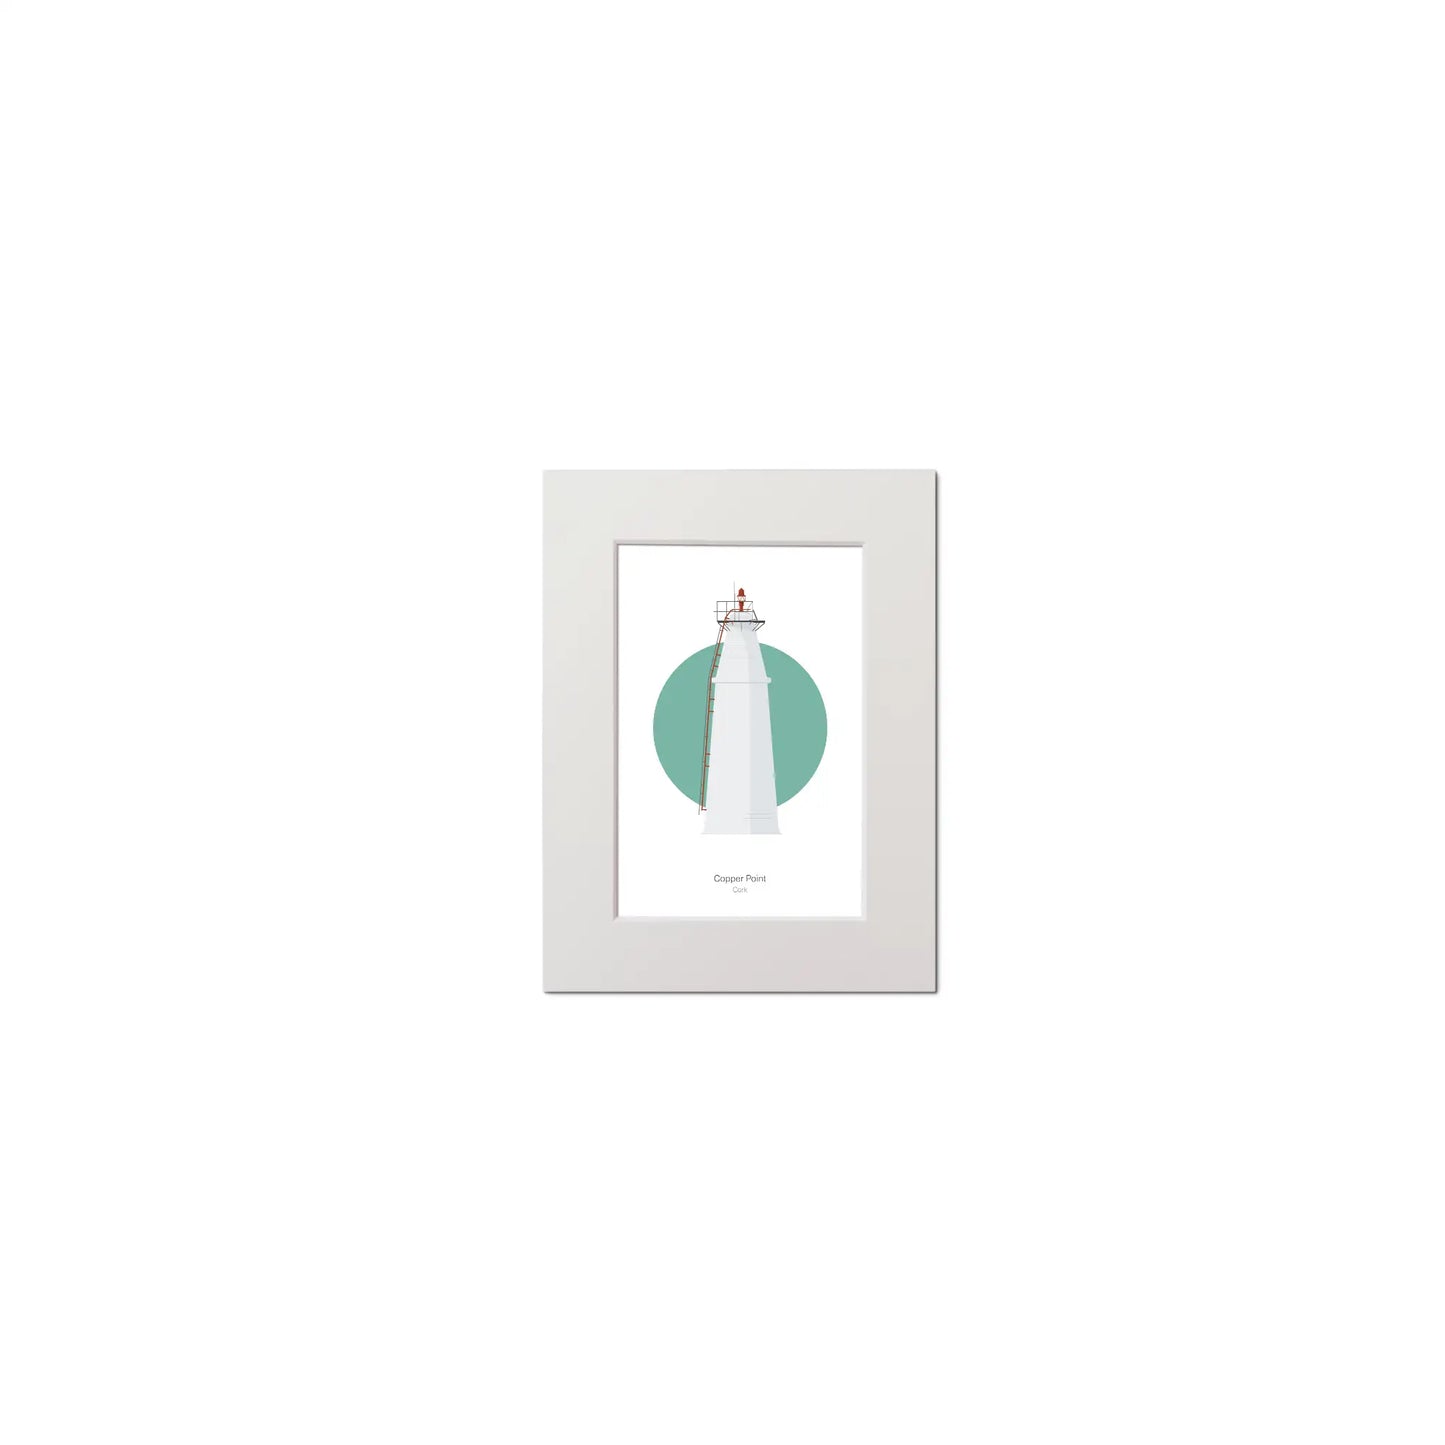 Contemporary graphic illustration of Copper Point lighthouse on a white background inside light blue square, mounted and measuring 15x20cm.